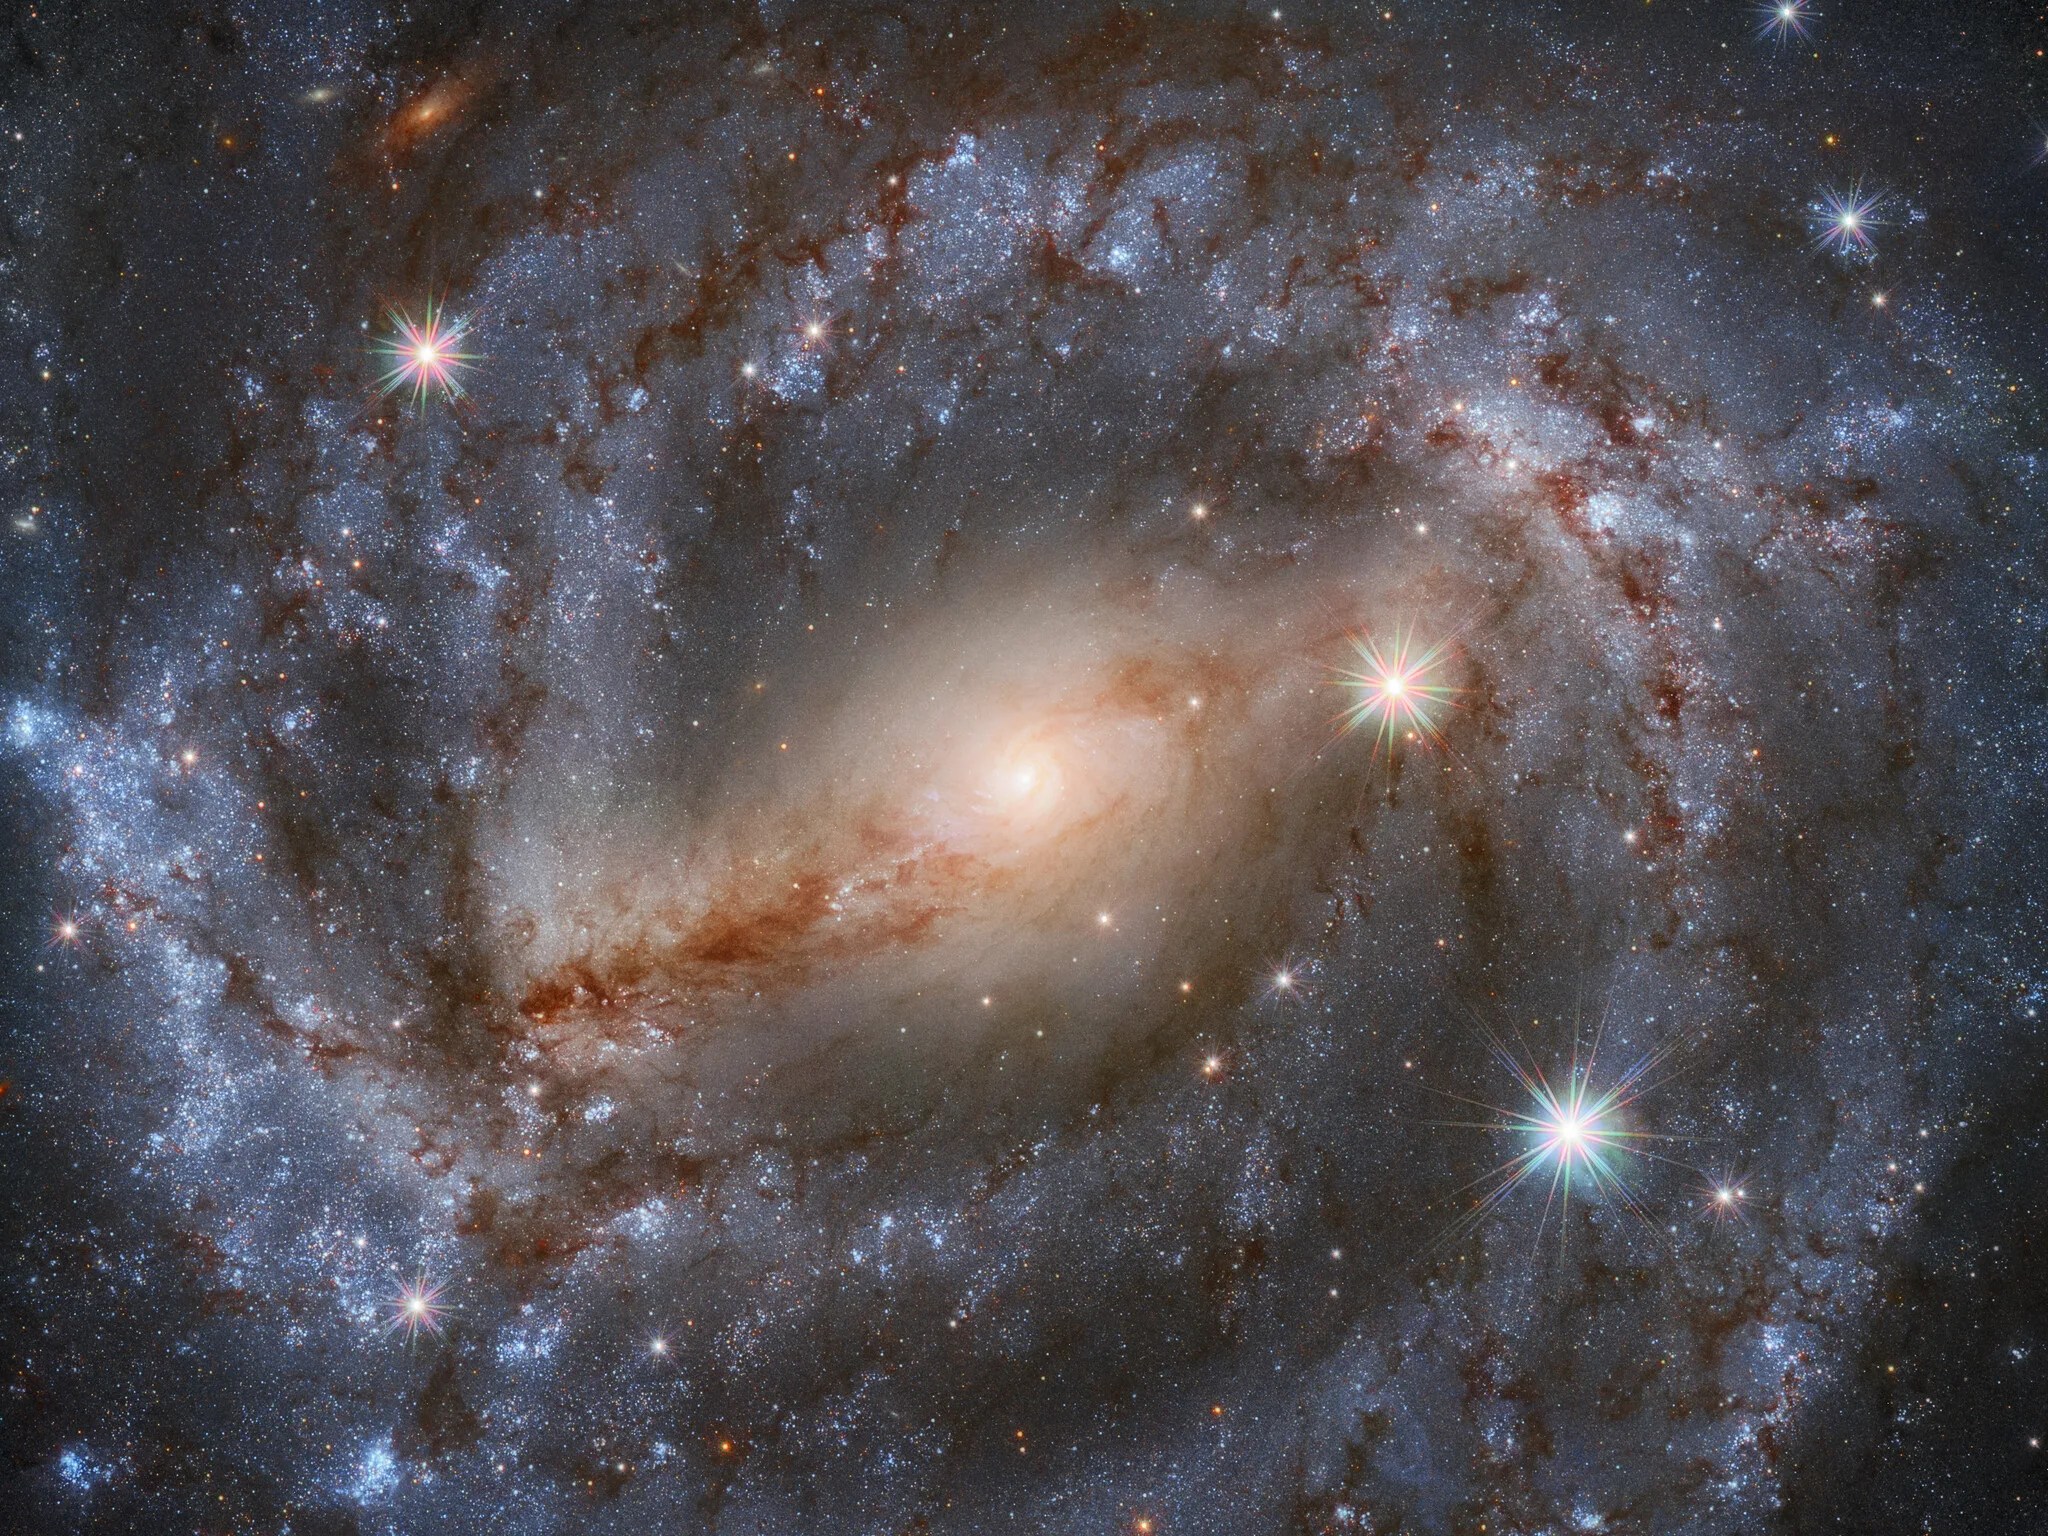 Spiral galaxy ngc 5643 with a bright, barred center and vaguely purplish swirling arms